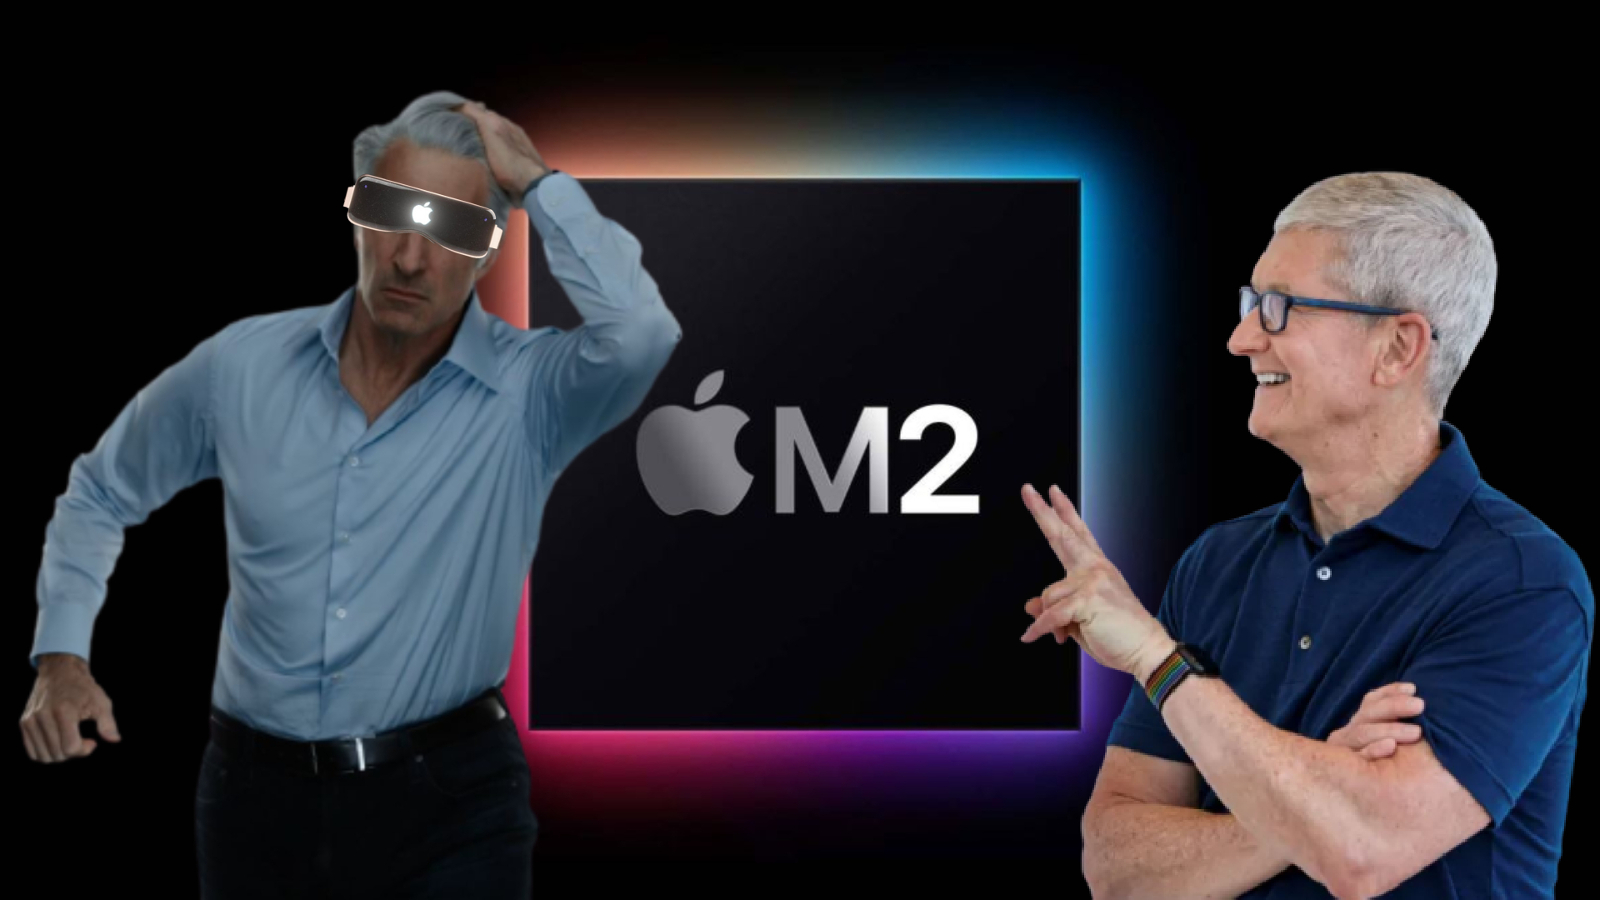 The Apple VR/AR headset can be powered by the M2 CPU